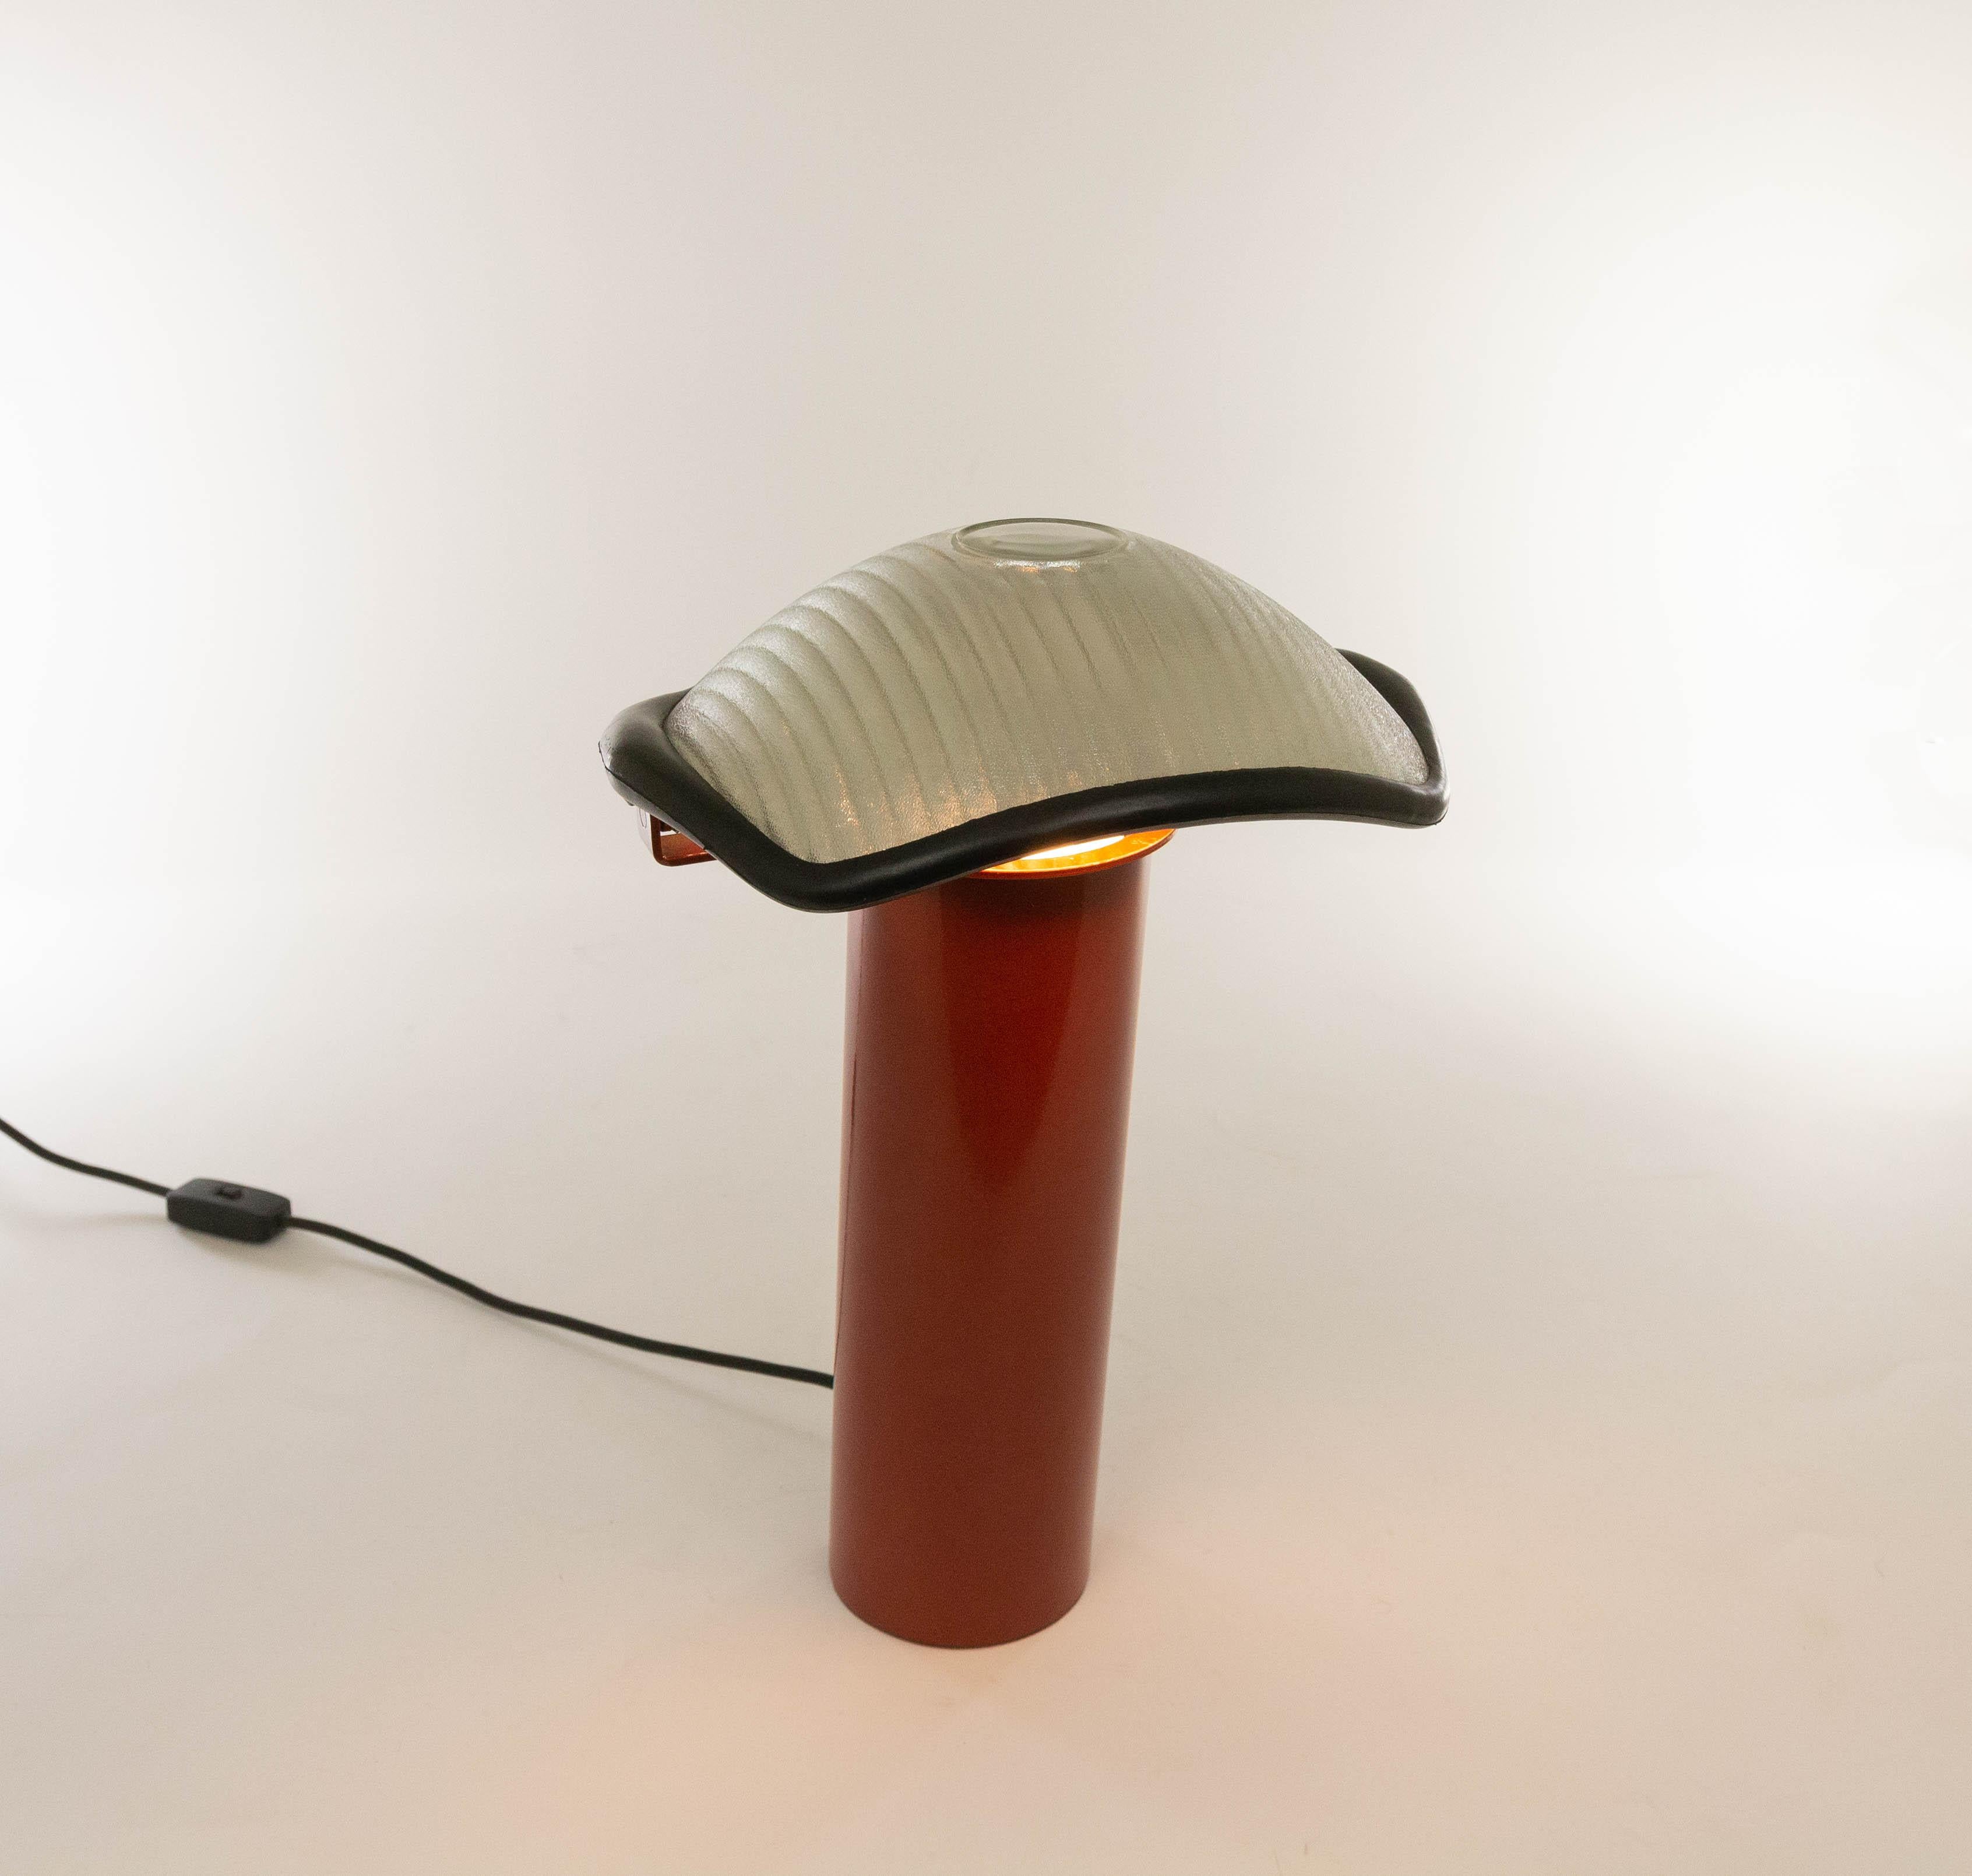 An exceptional table lamp model Brontes, designed by Cini Boeri and produced by Artemide, 1981.

The model consists of a heavy red lacquered cylindrical metal base and a pivoting shade with a rubber rim. The glass shade of Brontes is silver on the